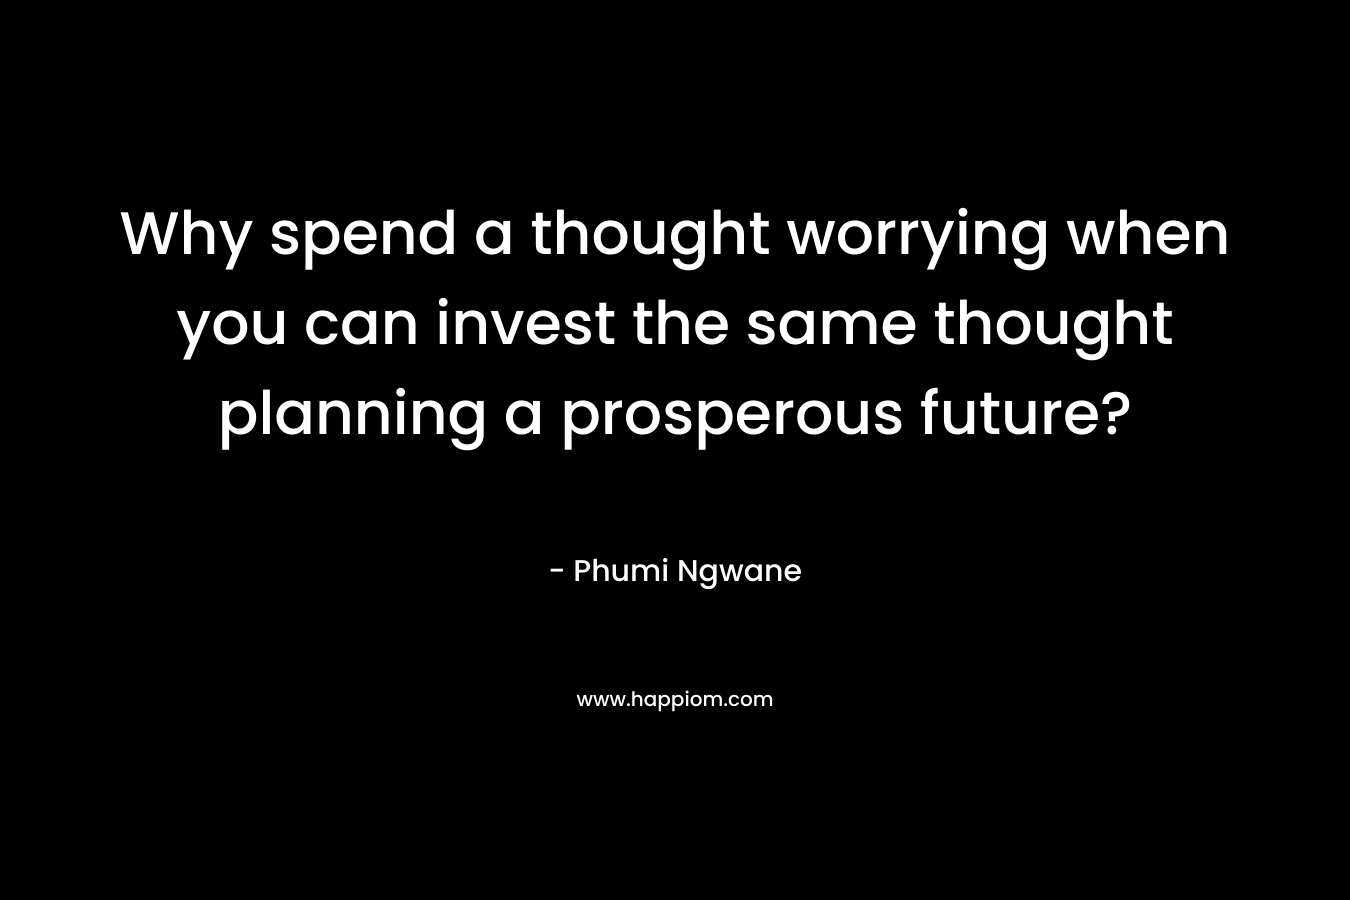 Why spend a thought worrying when you can invest the same thought planning a prosperous future?